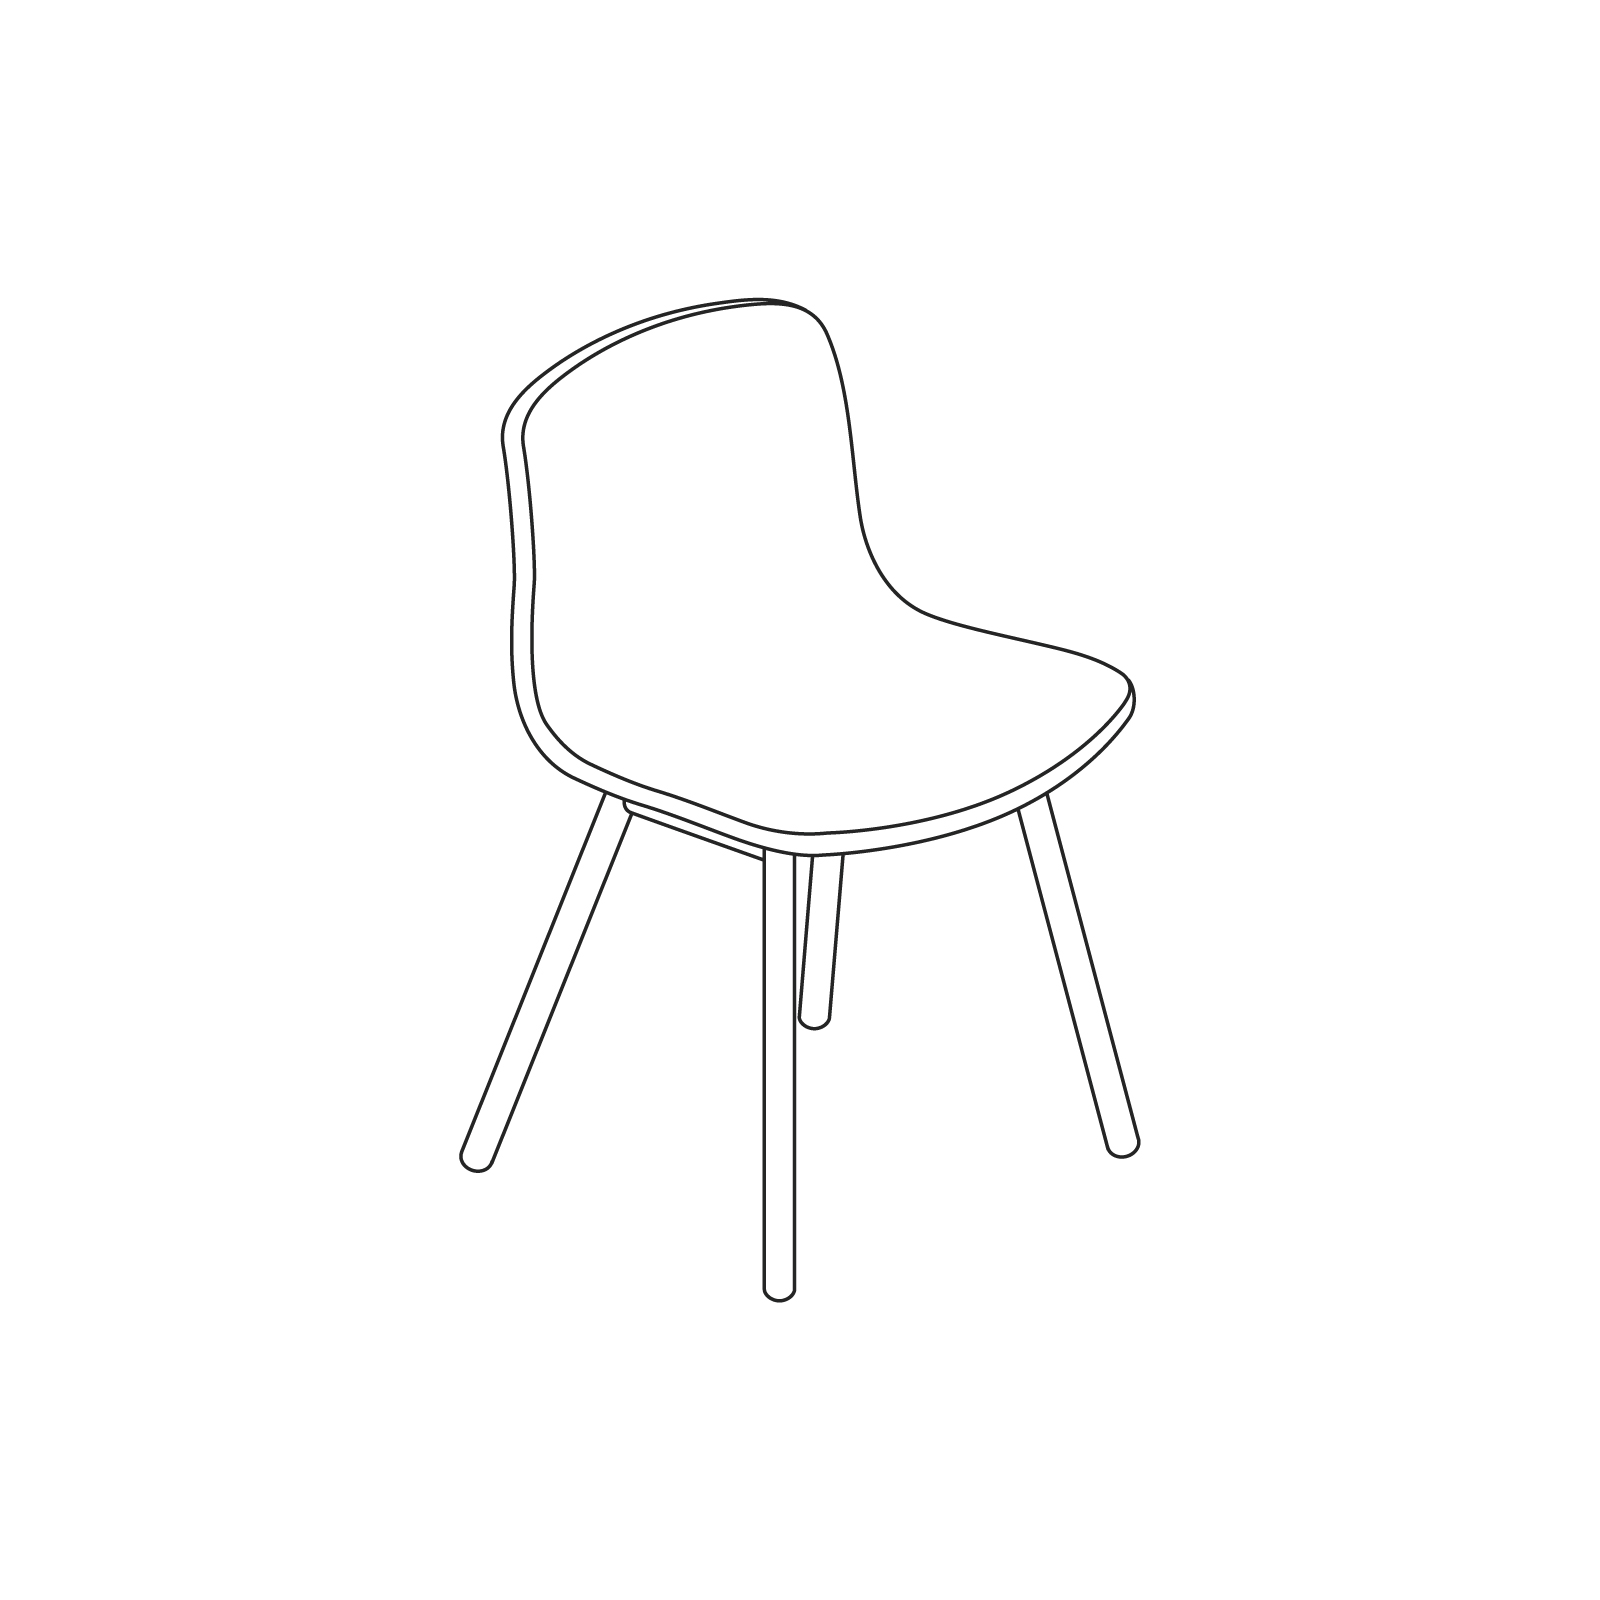 A line drawing - About A Chair–Armless–4-Leg Solid Wood Base (AAC12, AAC13)